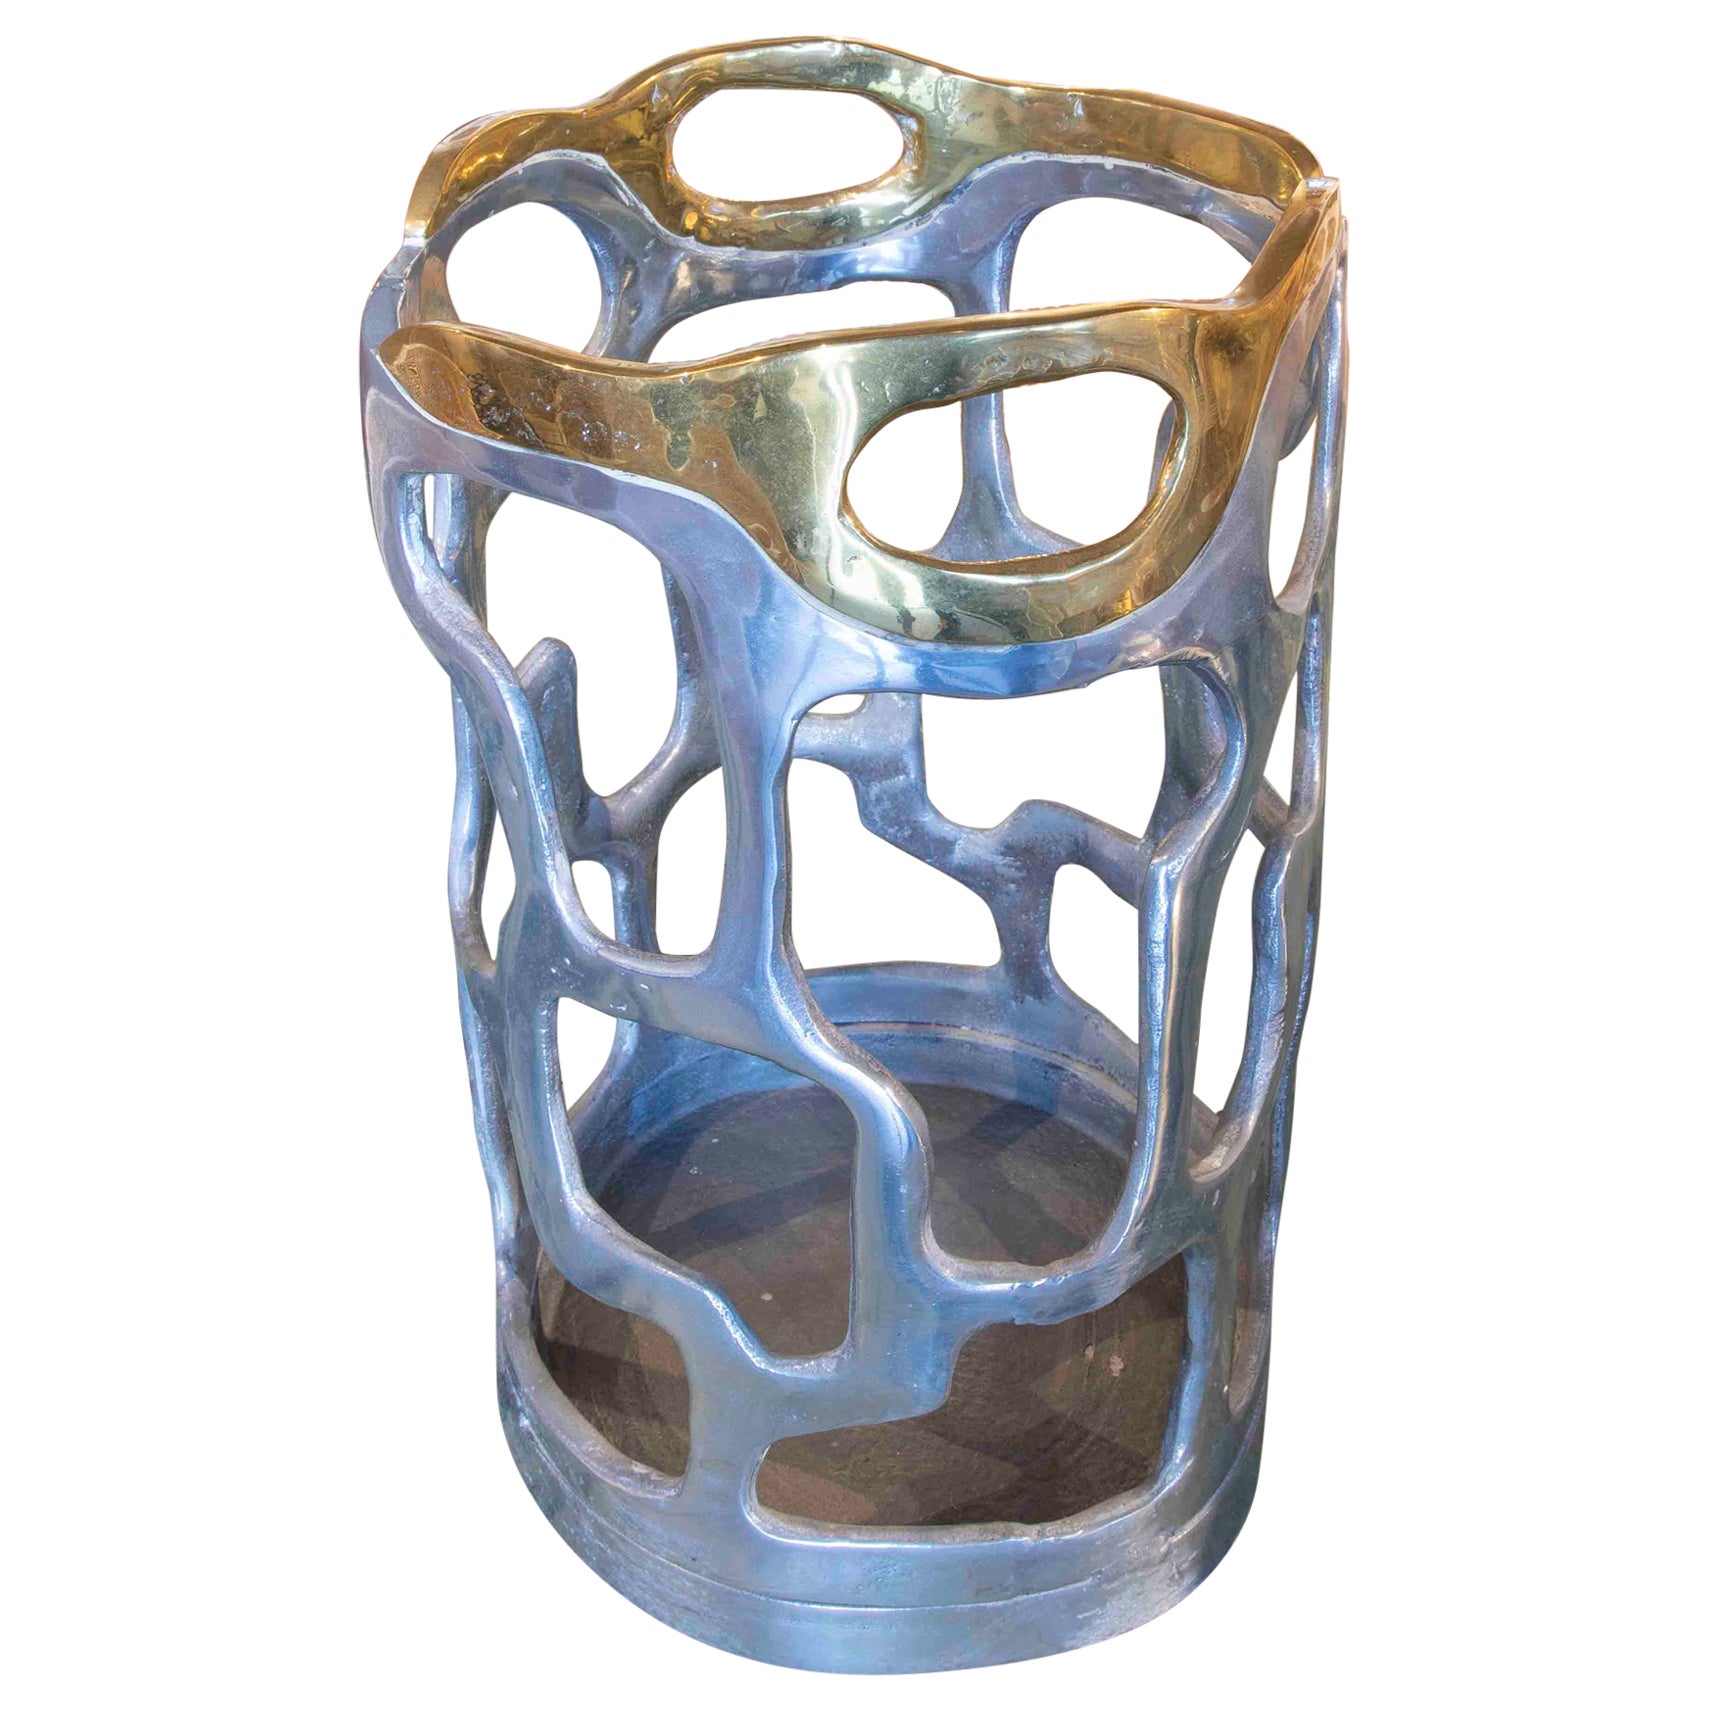 Bronze Umbrella Stand in Gold and Silver Finish by the Artist David Marshall